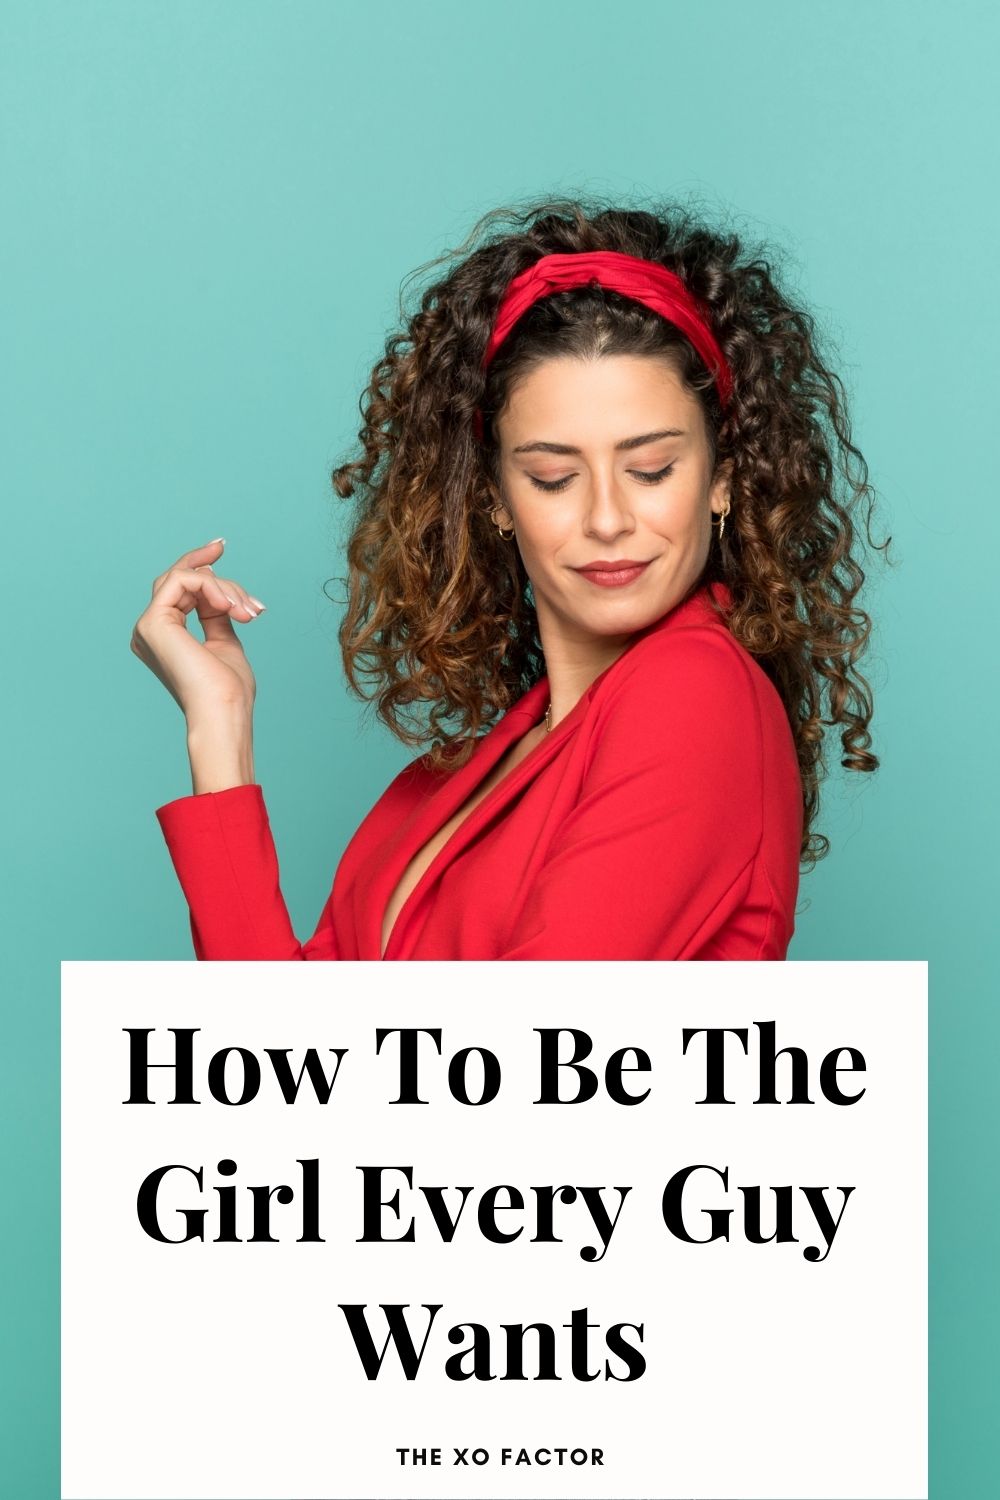 How To Be The Girl Every Guy Wants